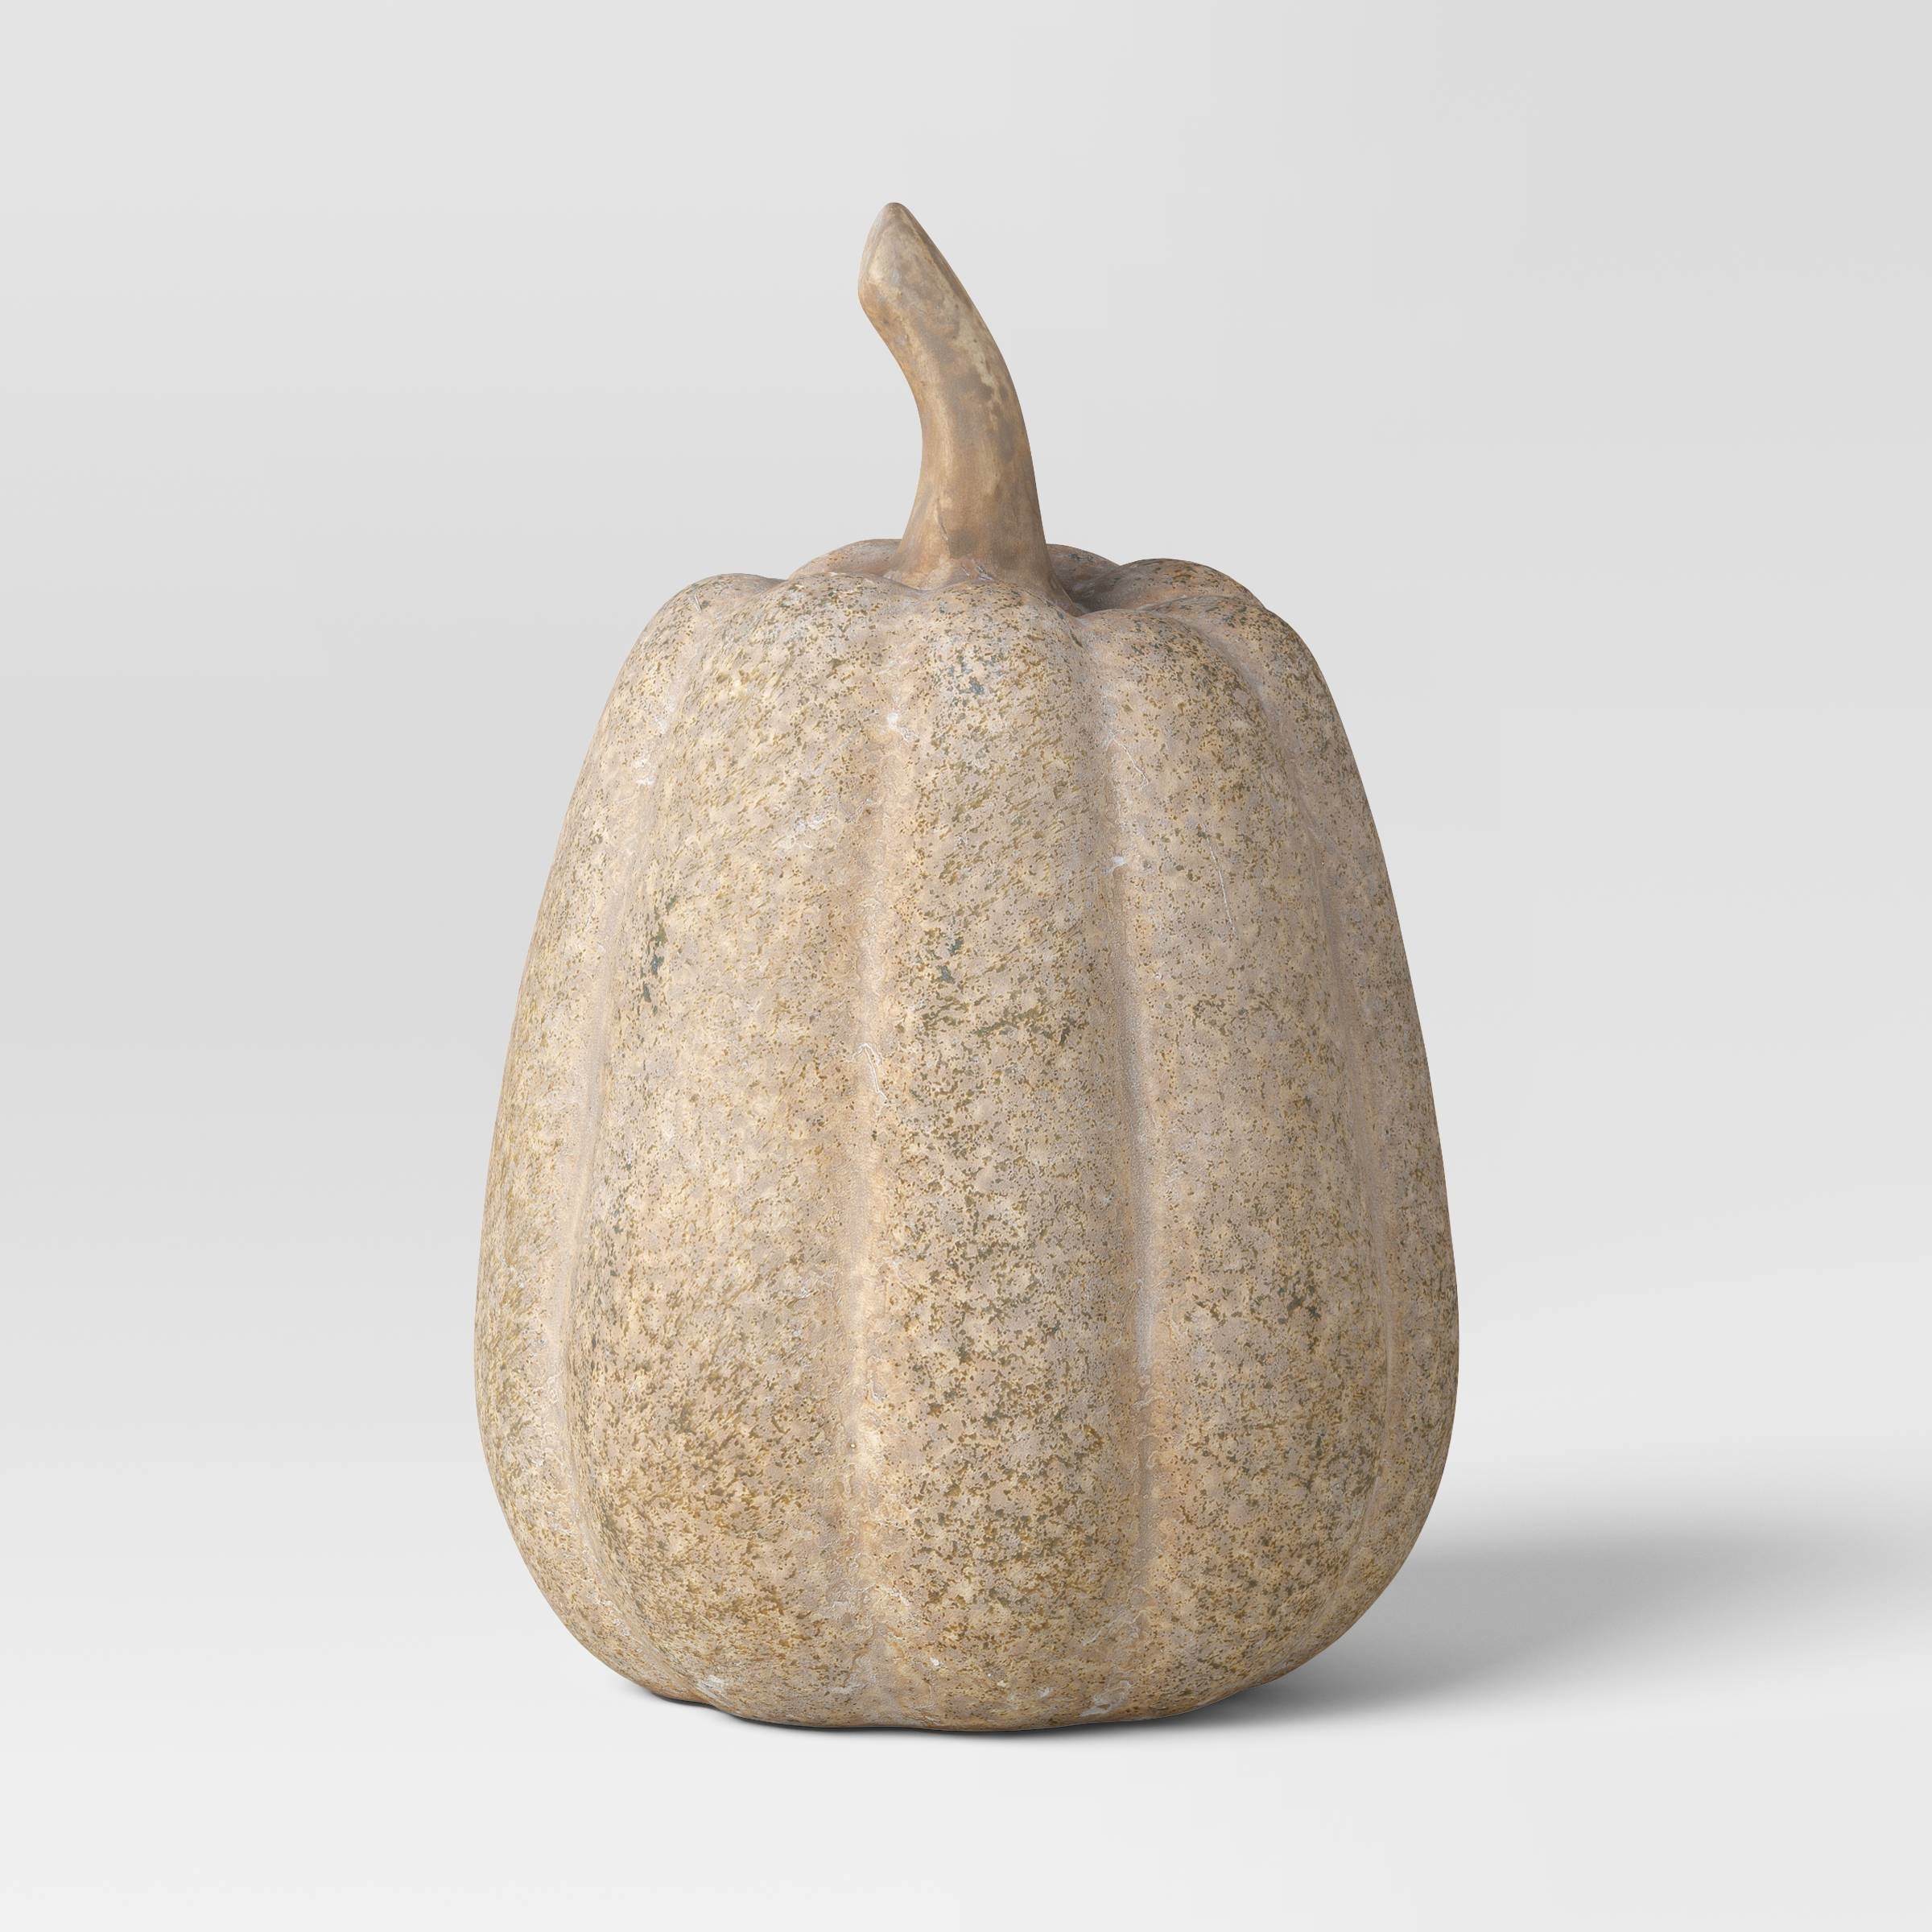 the ceramic pumpkin with an oblong shape and speckled finish